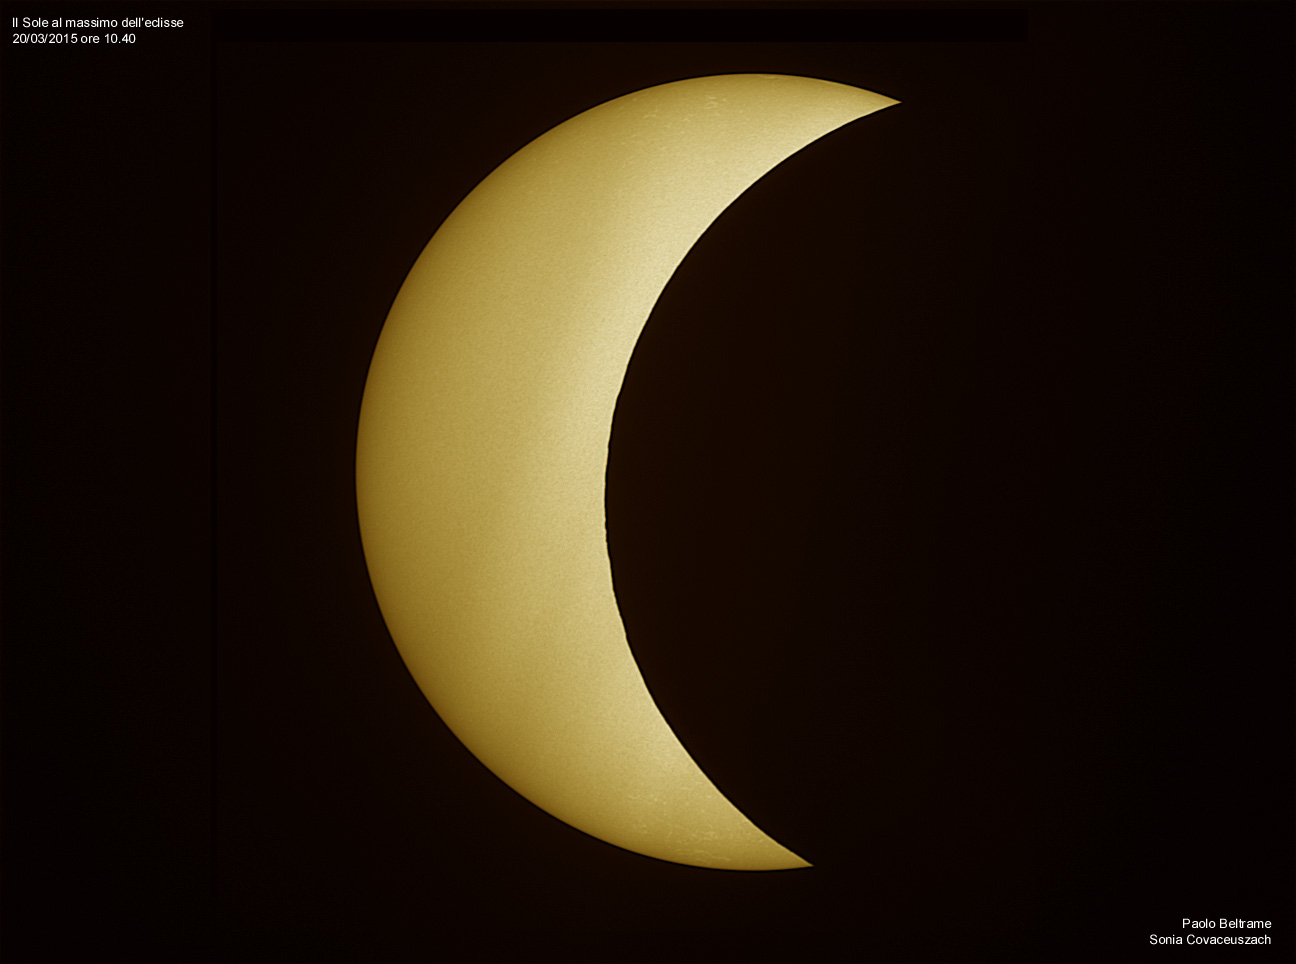 Partial eclipse photographed from Talmassons: 147 KB; click on the image to enlarge